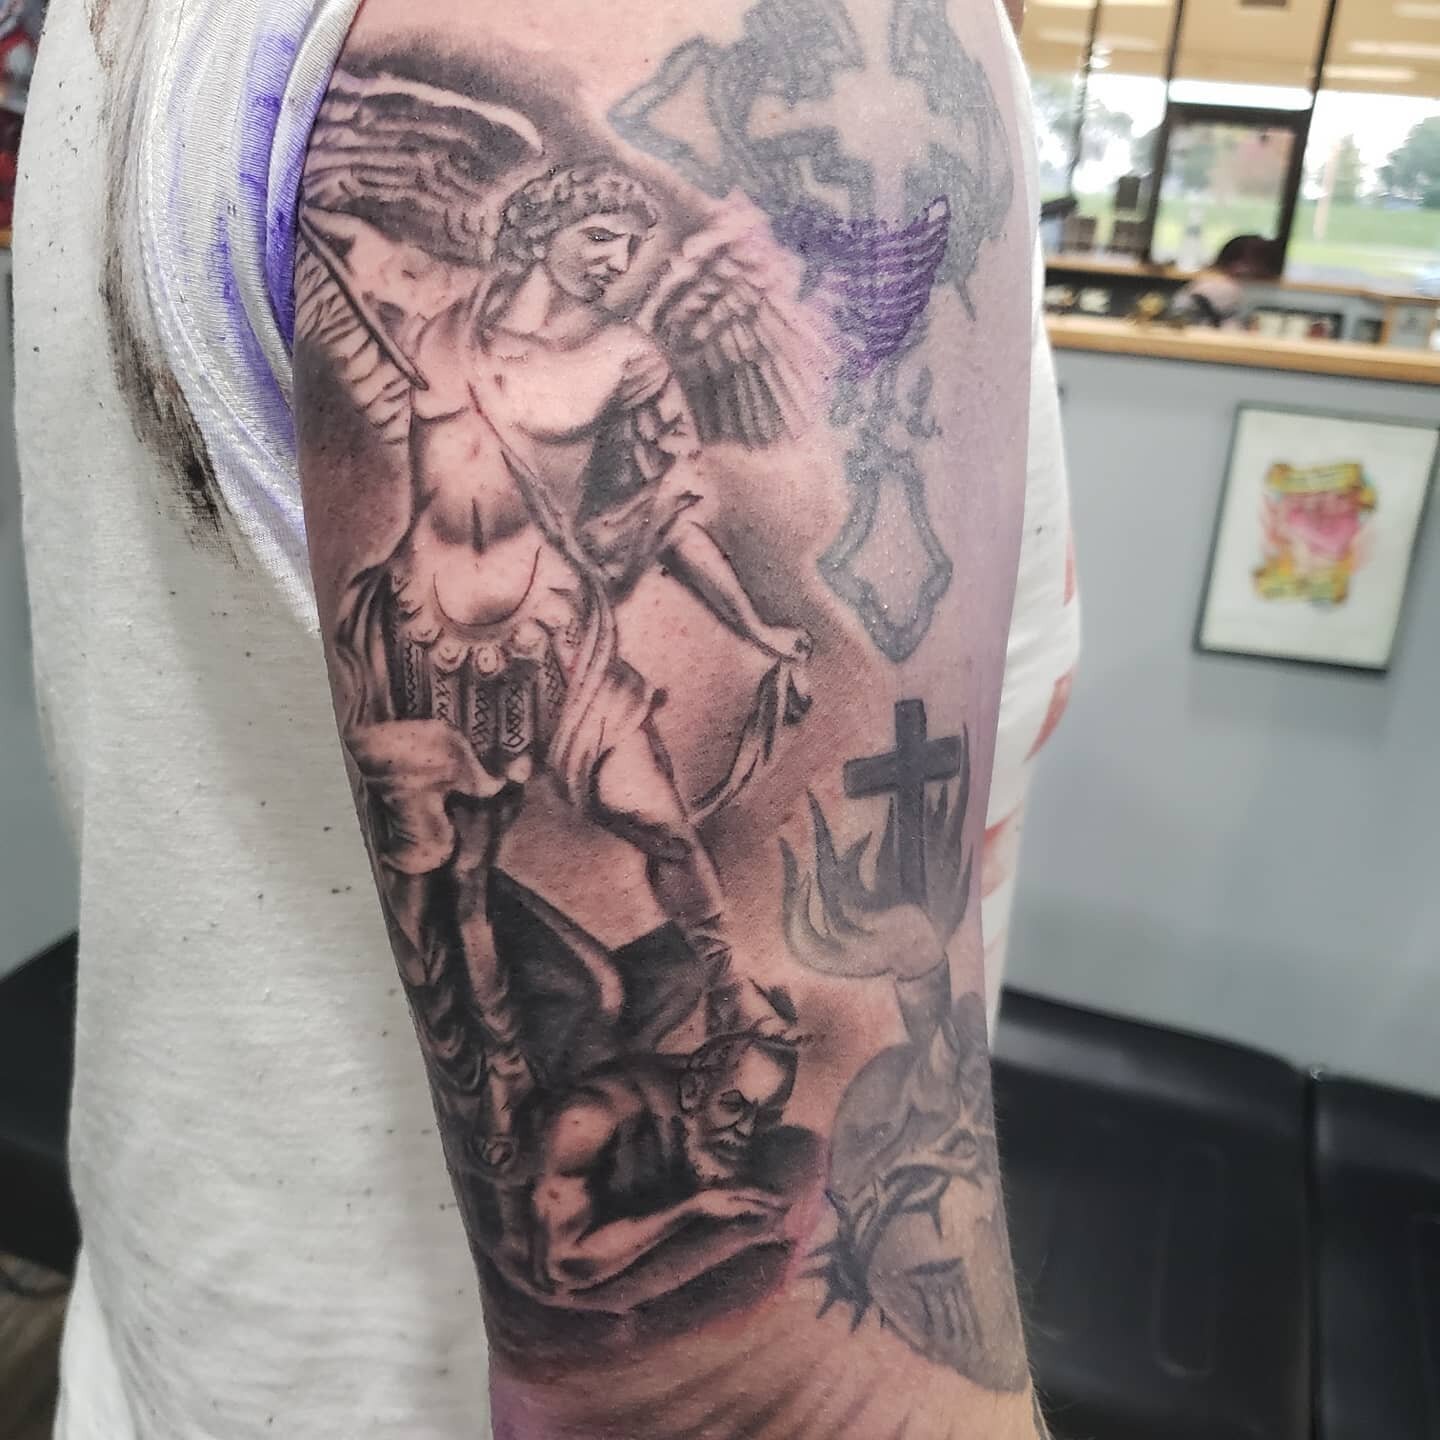 Man, this was a fun one. More stuff like this please!!! Saint Michael doing his thing 👉 swipe for the video
.
.
.
.
.
#LightningRevivalTattooCompany #LightningRevivalTattooCo #LightningRevivalTattoo #LightningRevival #LRTC #LRNate #Tattoo #Tattoos #